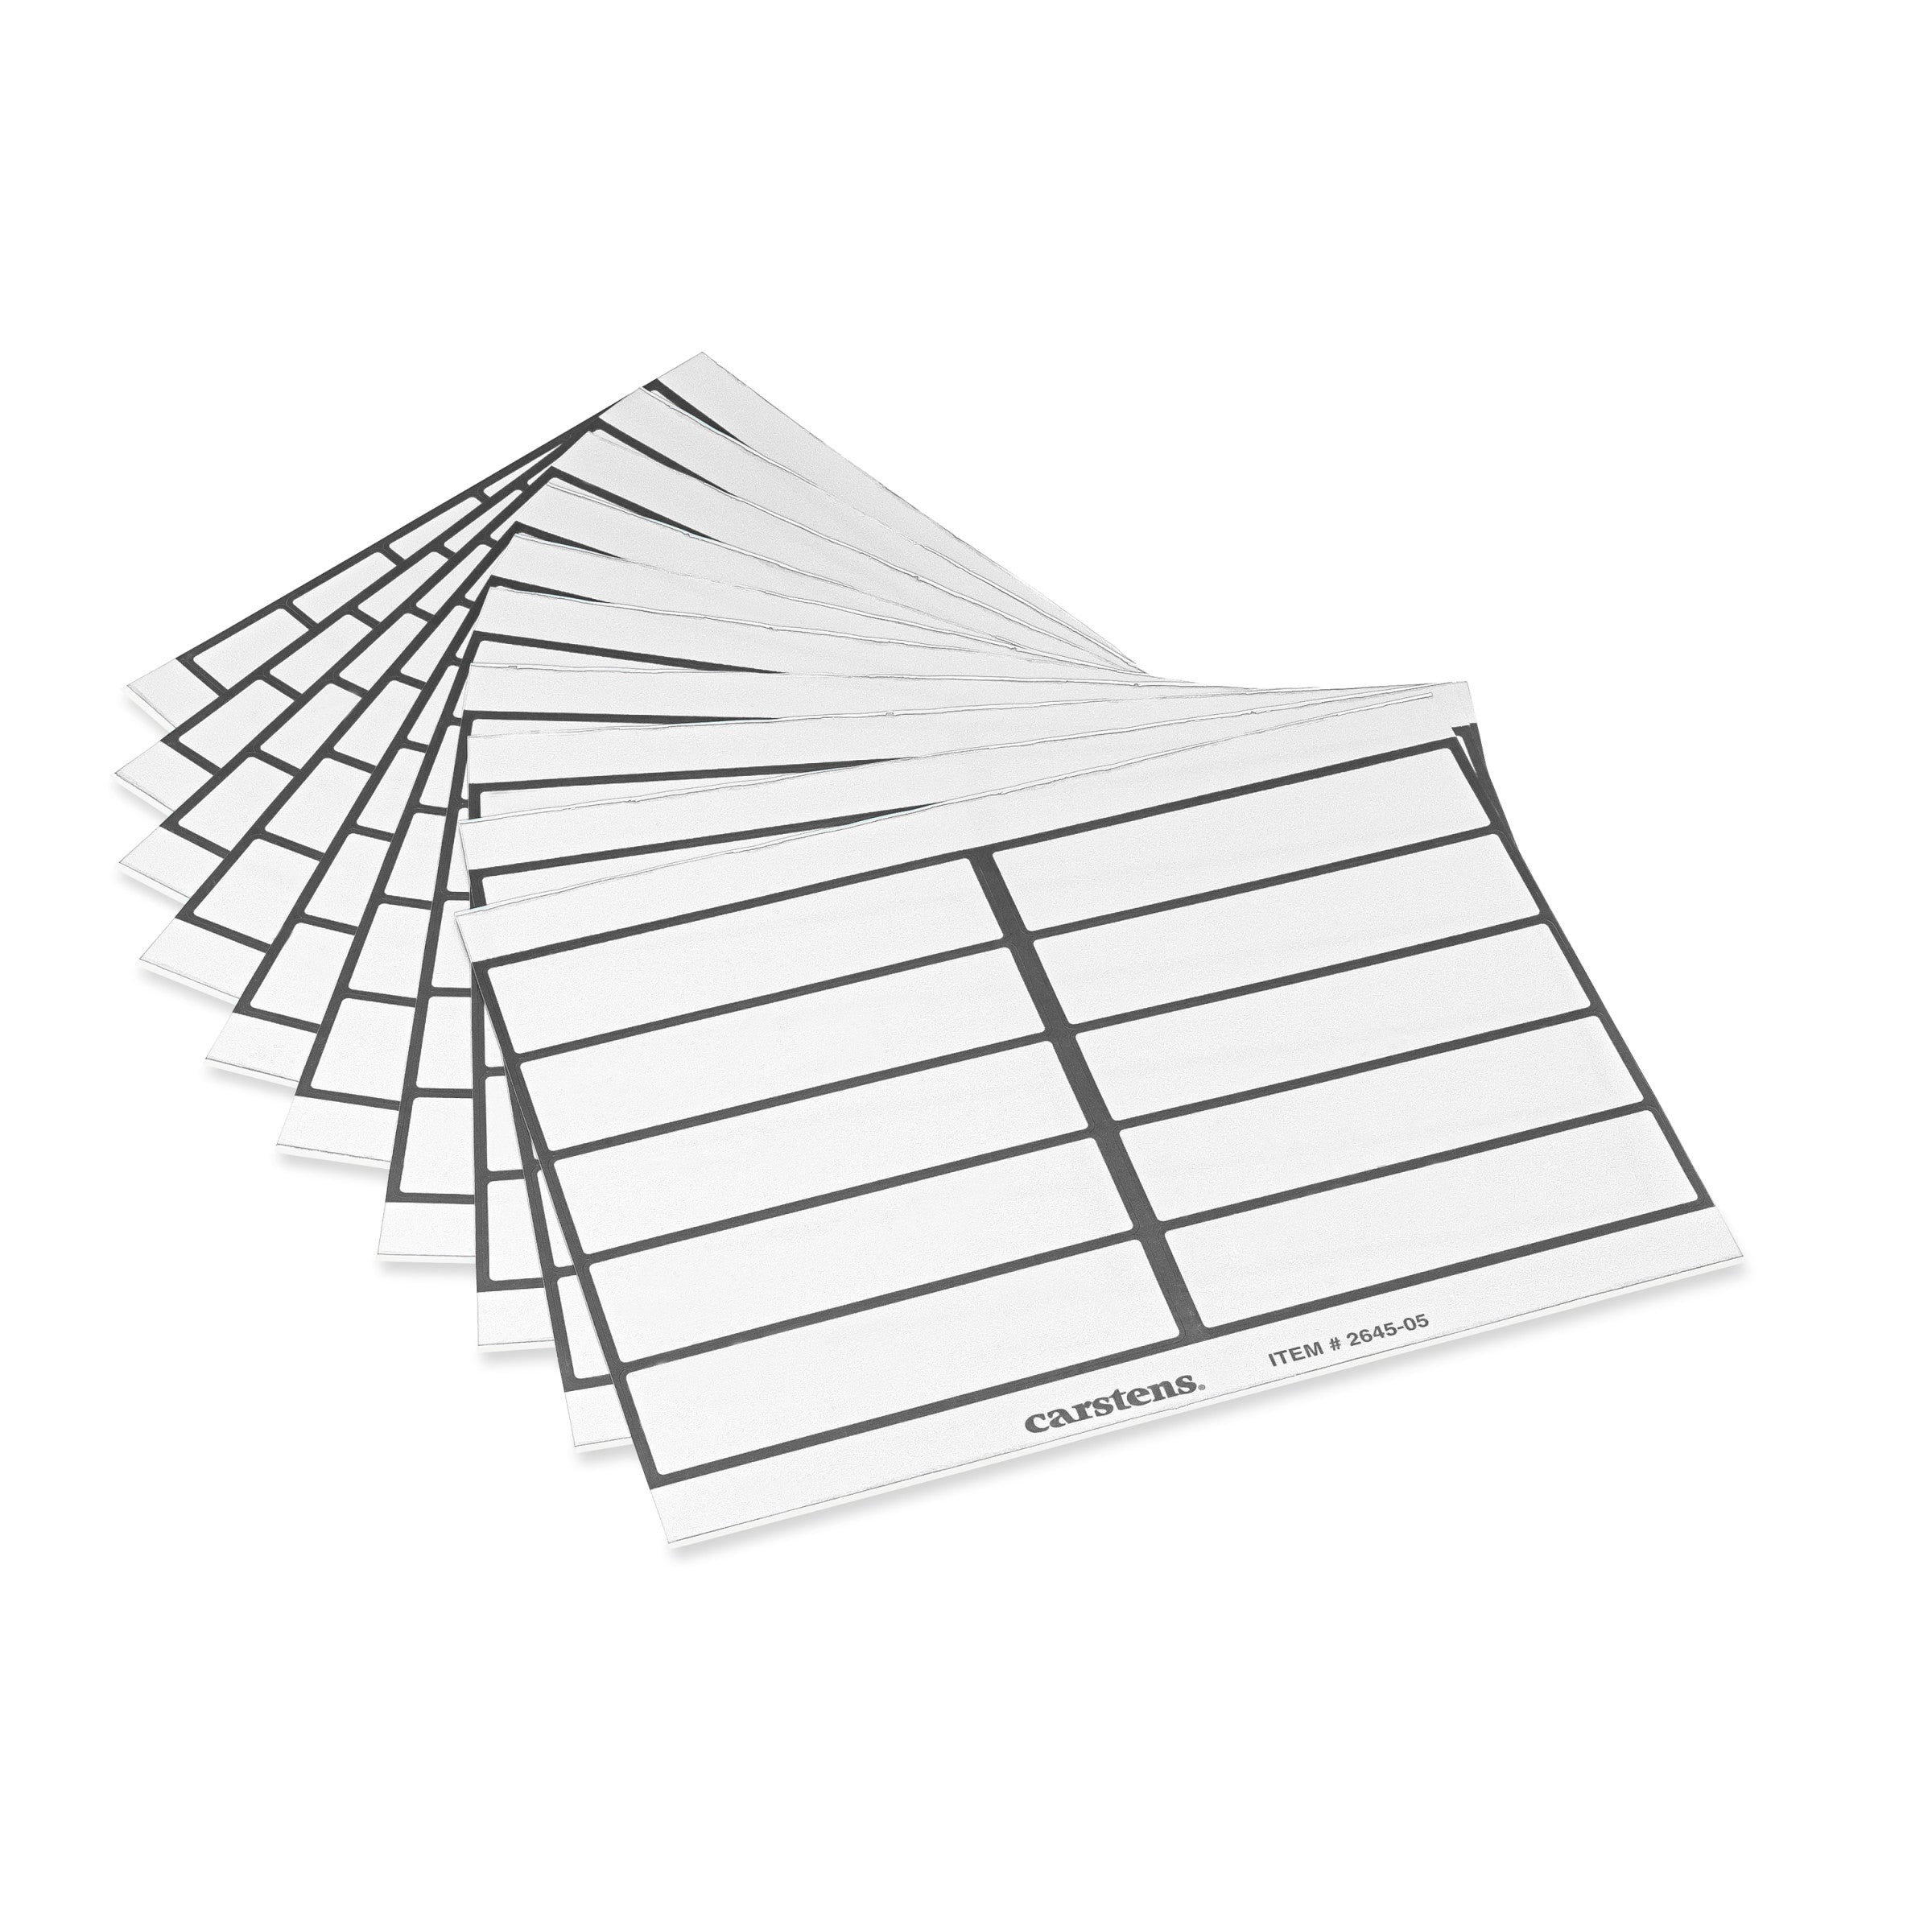 Blank Label Sheets